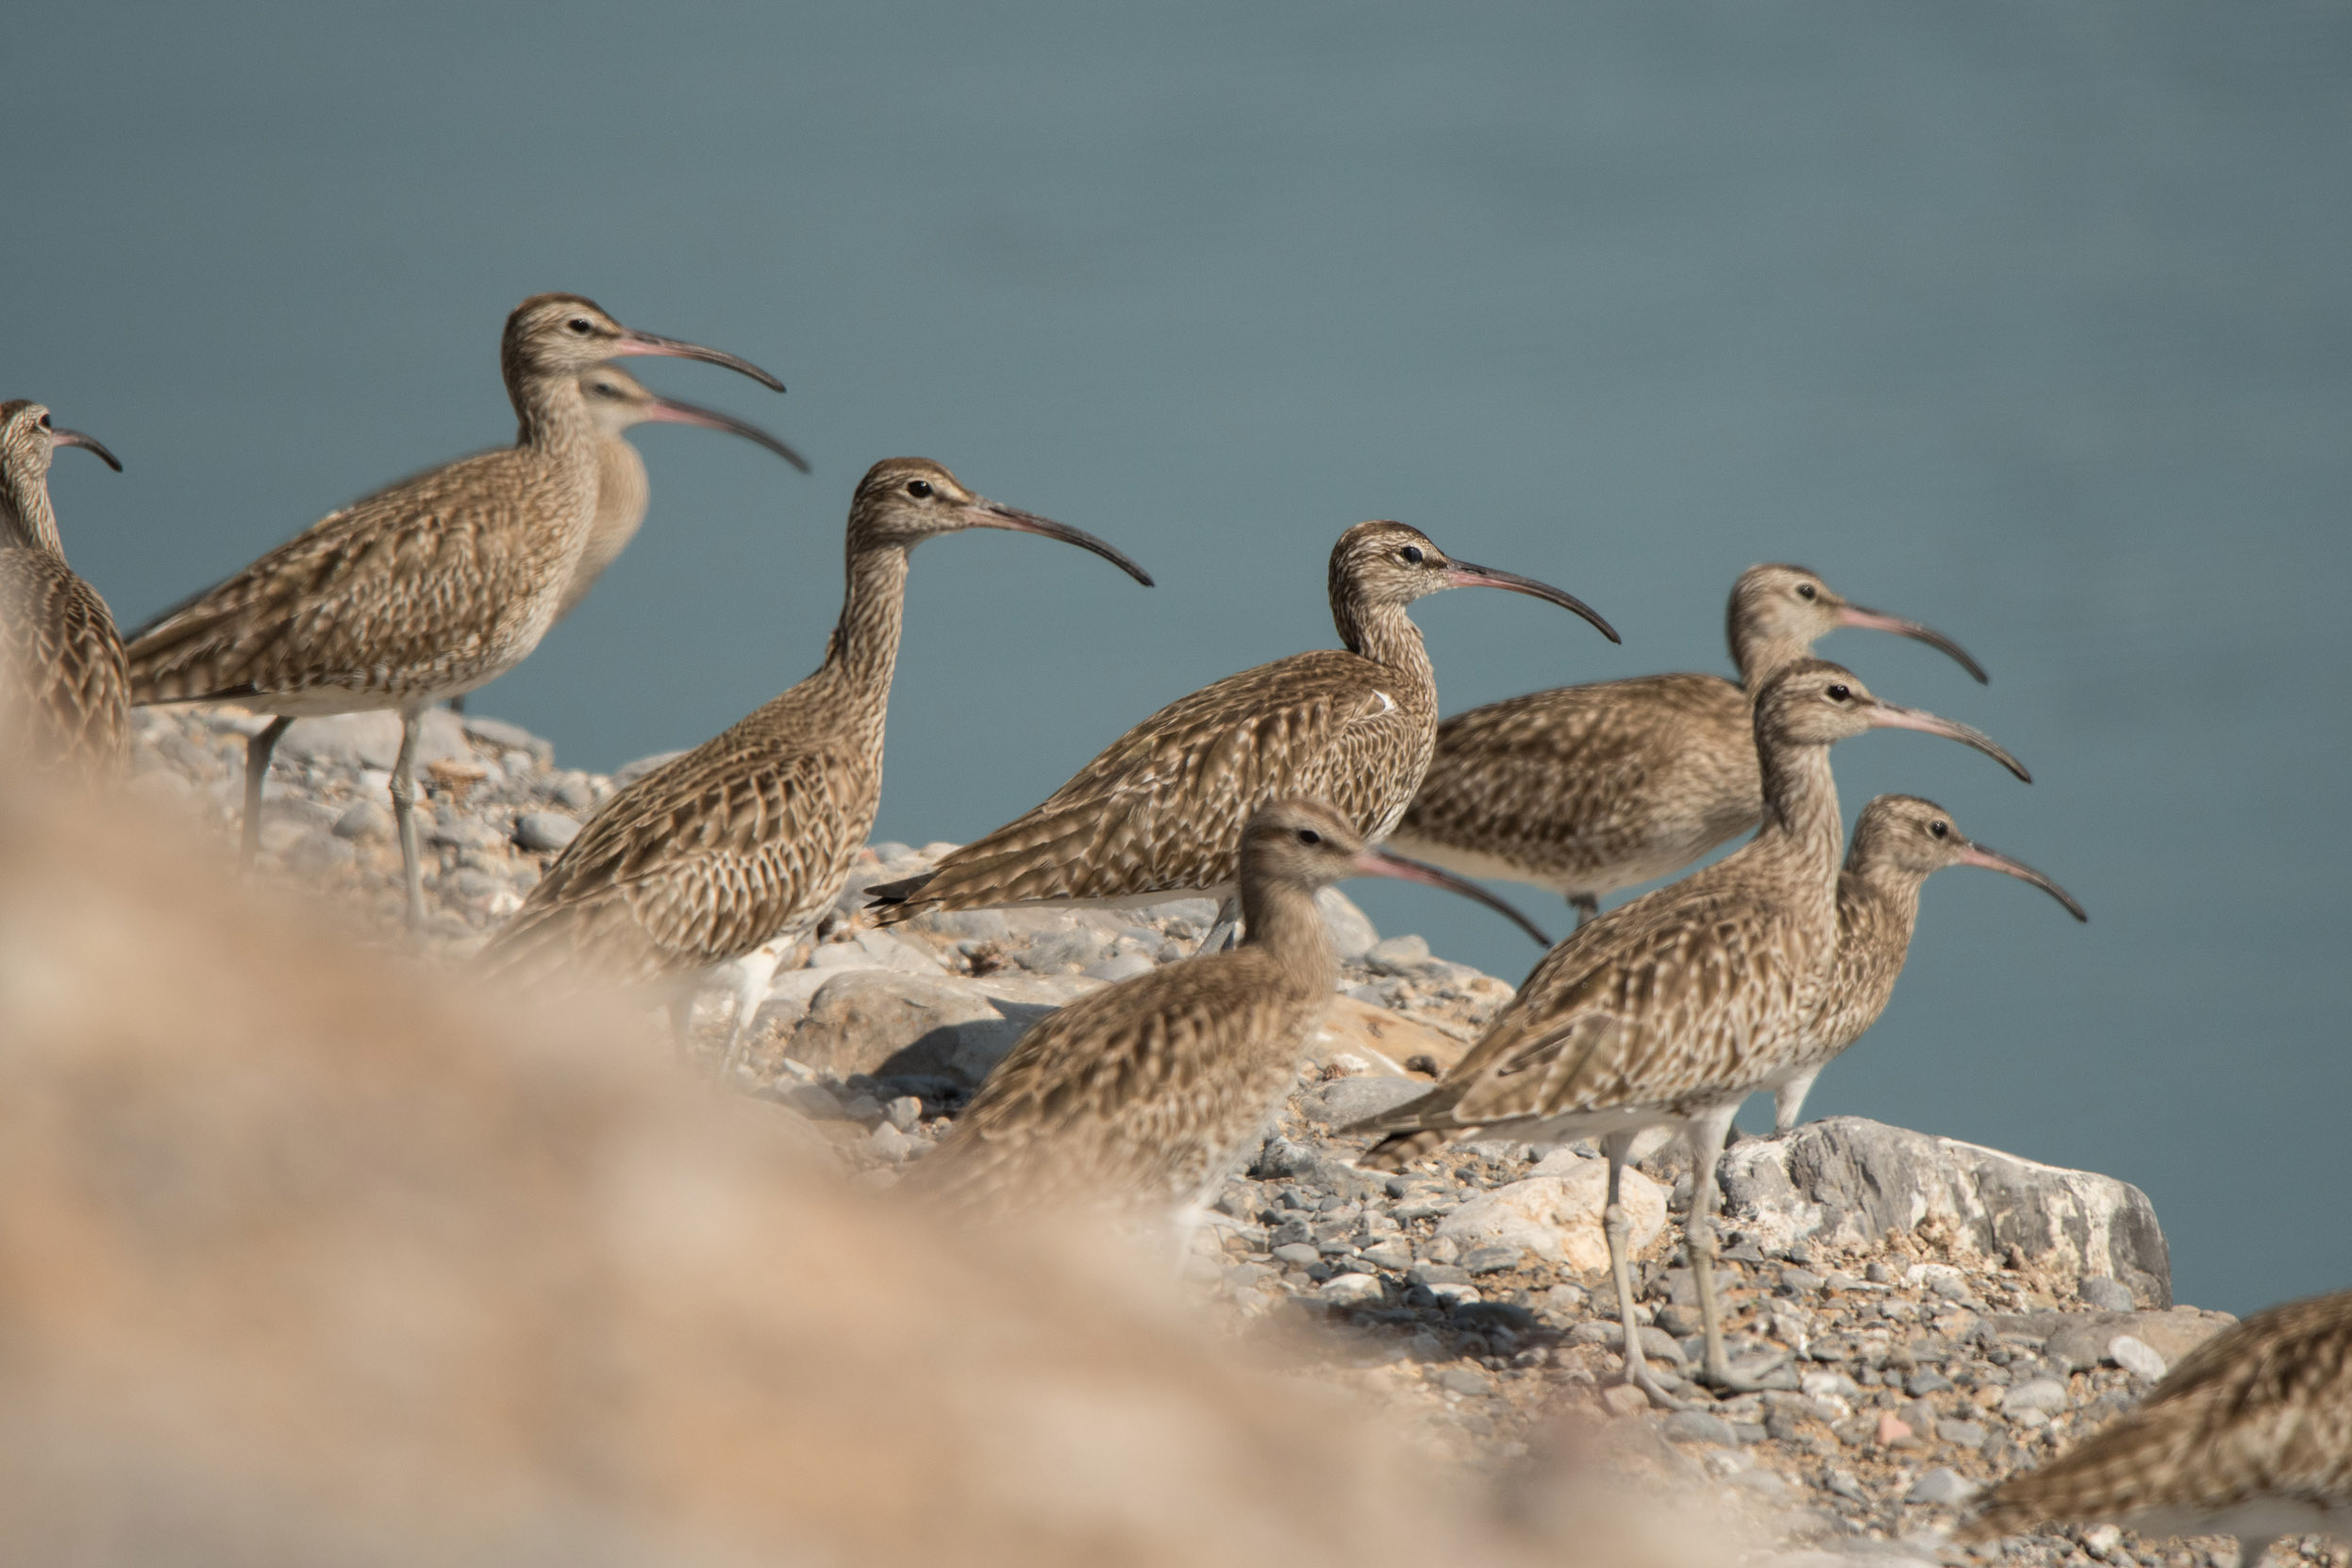 A flock of Whimbrel stood together on a rock next to the sea.